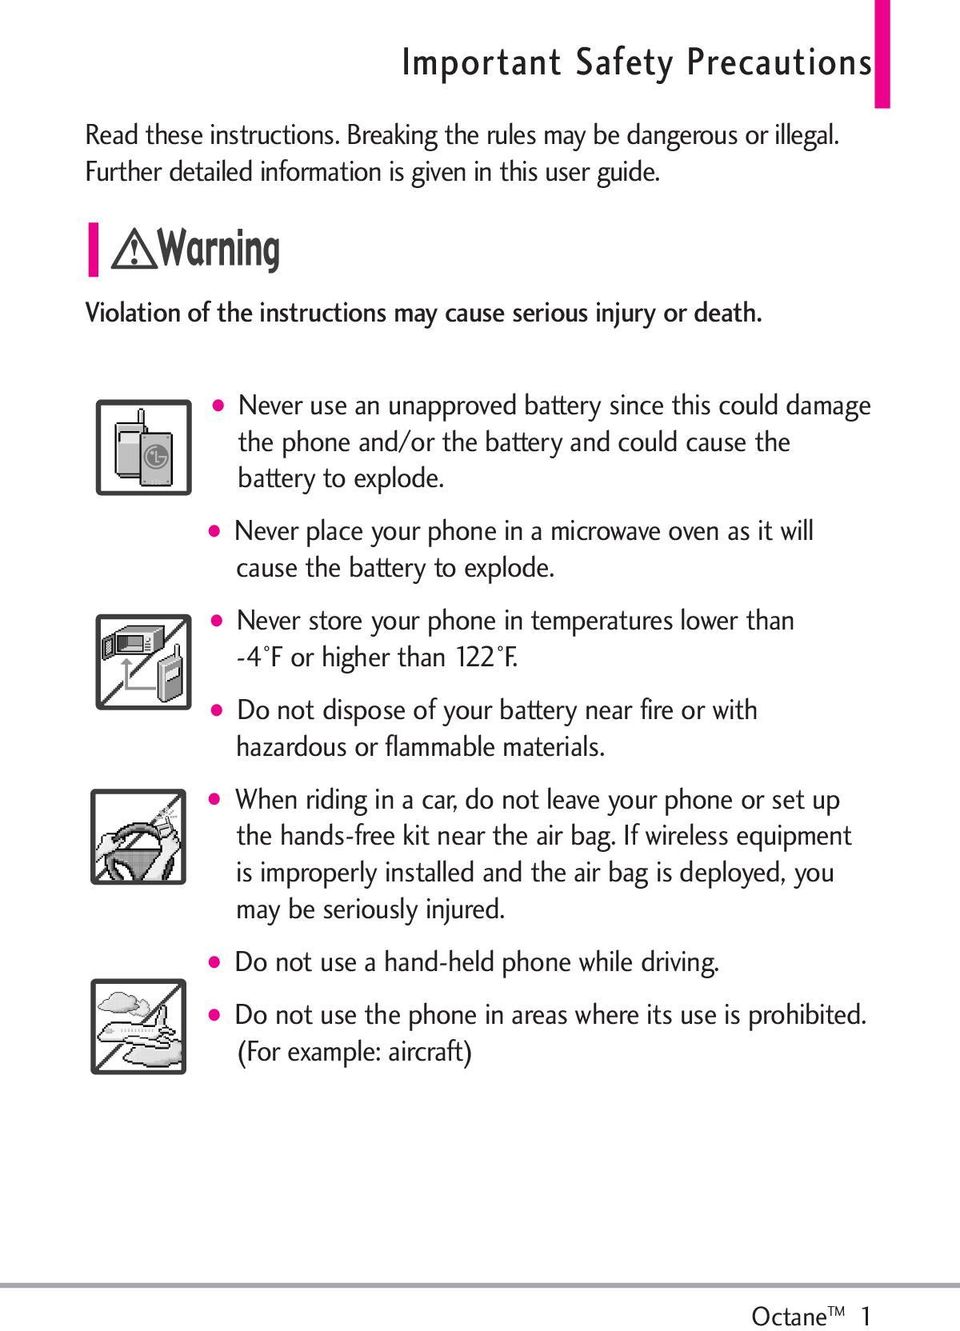 Never place your phone in a microwave oven as it will cause the battery to explode. Never store your phone in temperatures lower than -4 F or higher than 122 F.